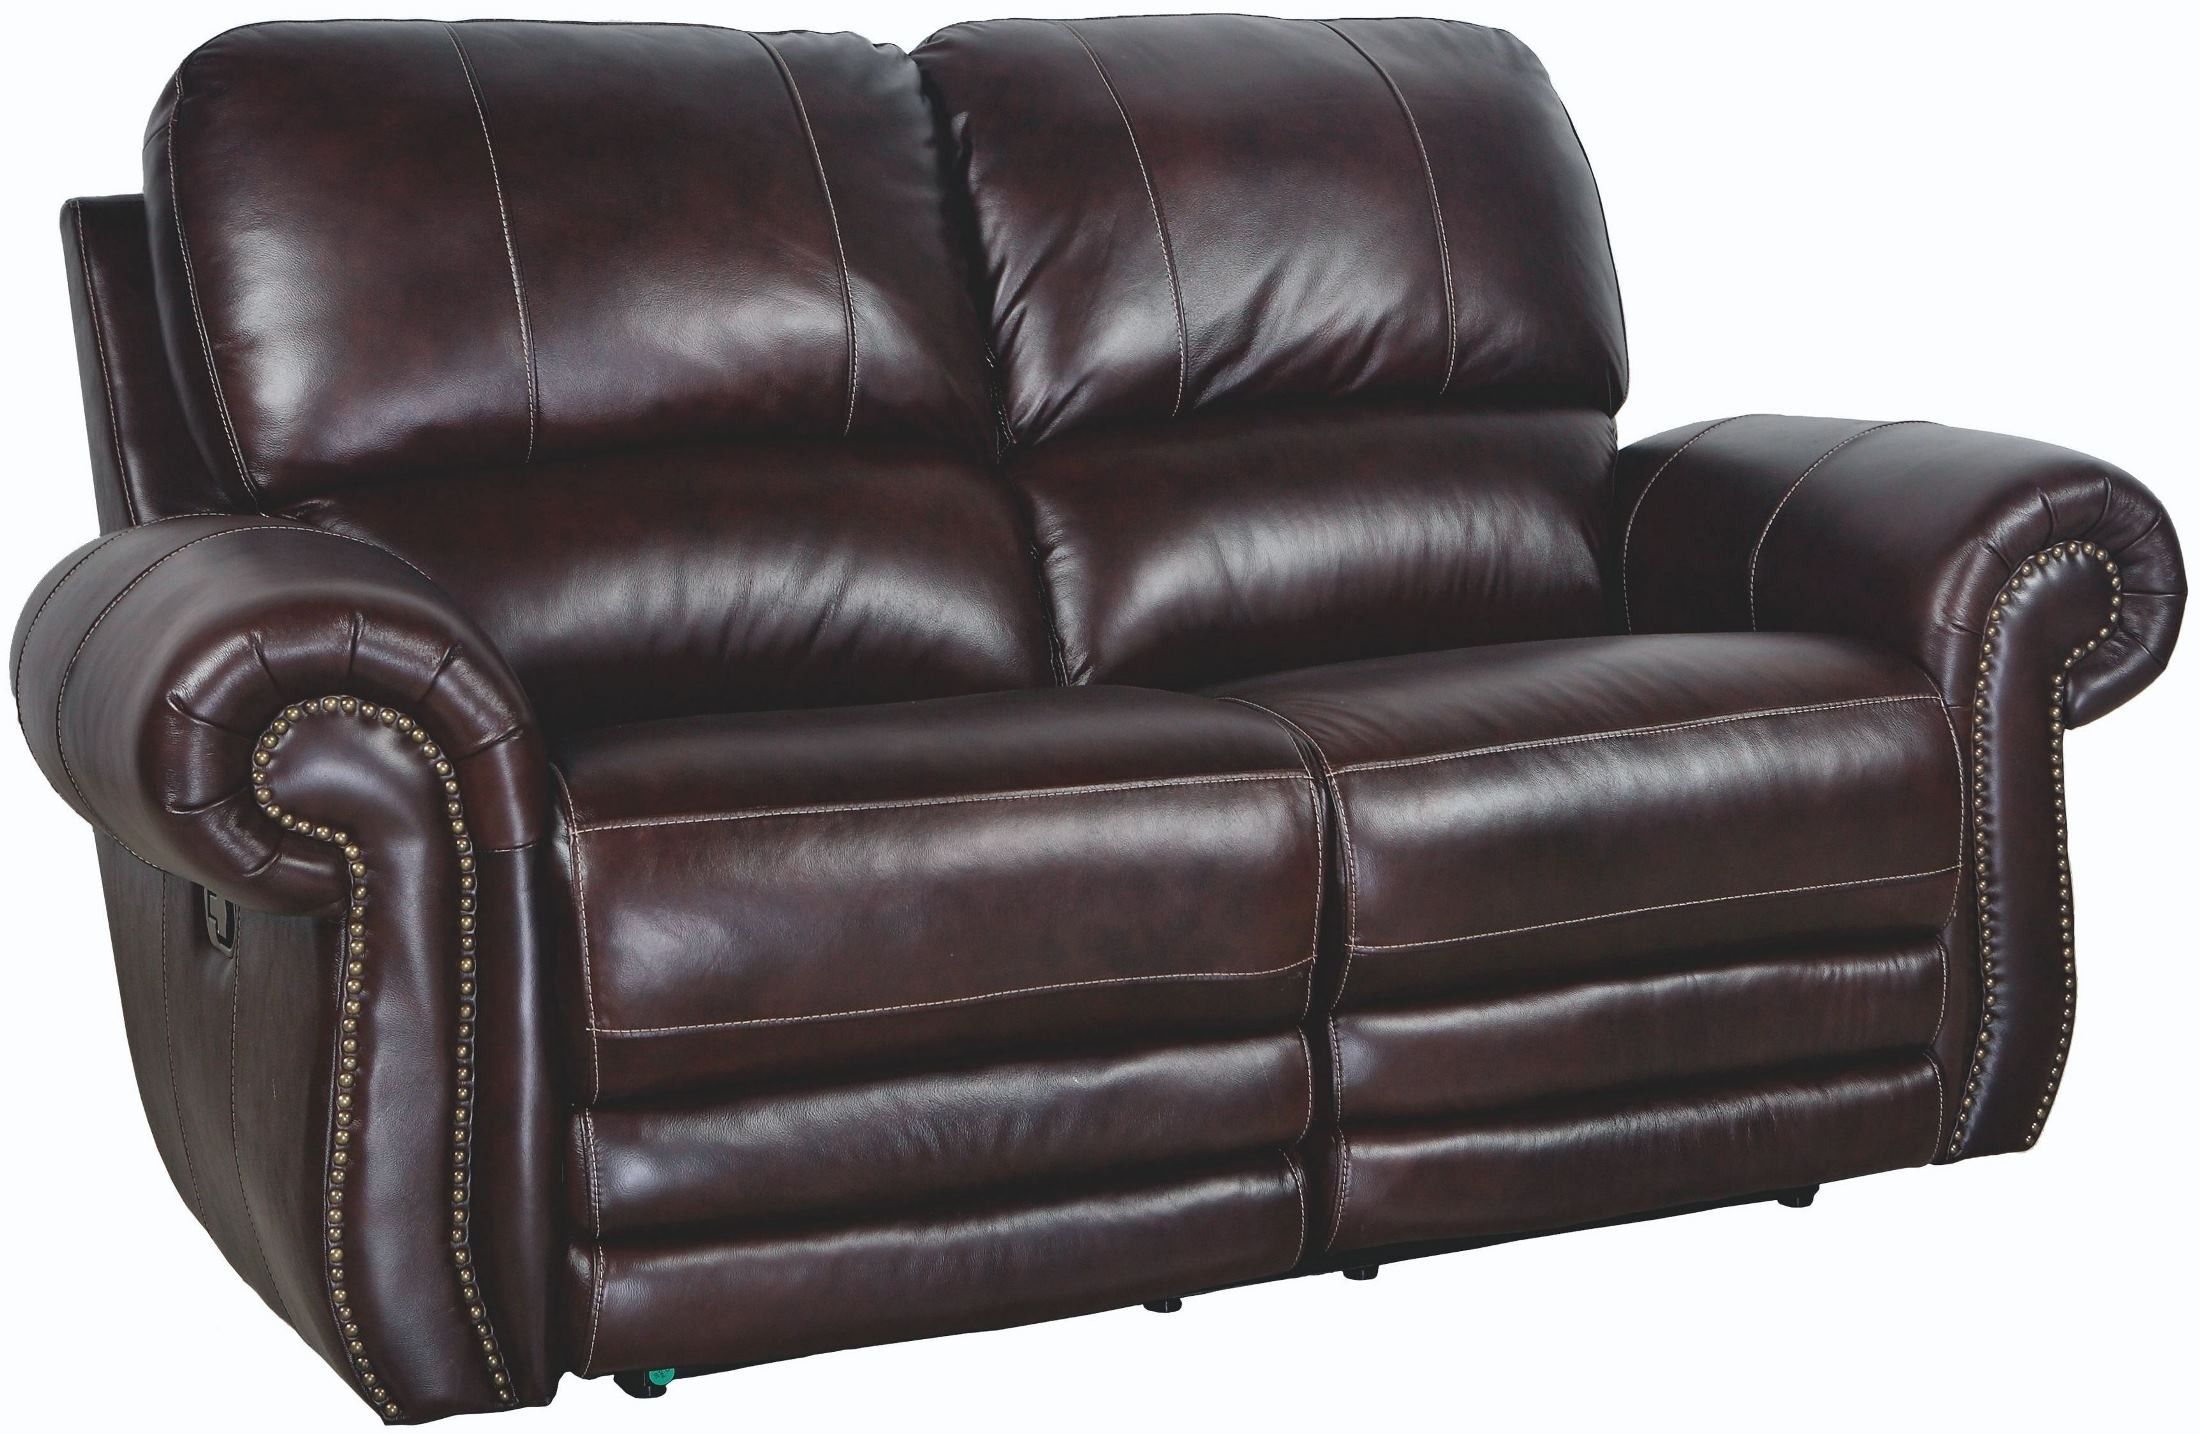 Rossi Dark Brown Power Reclining Loveseat From New Classic Regarding Expedition Brown Power Reclining Sofas (View 1 of 15)